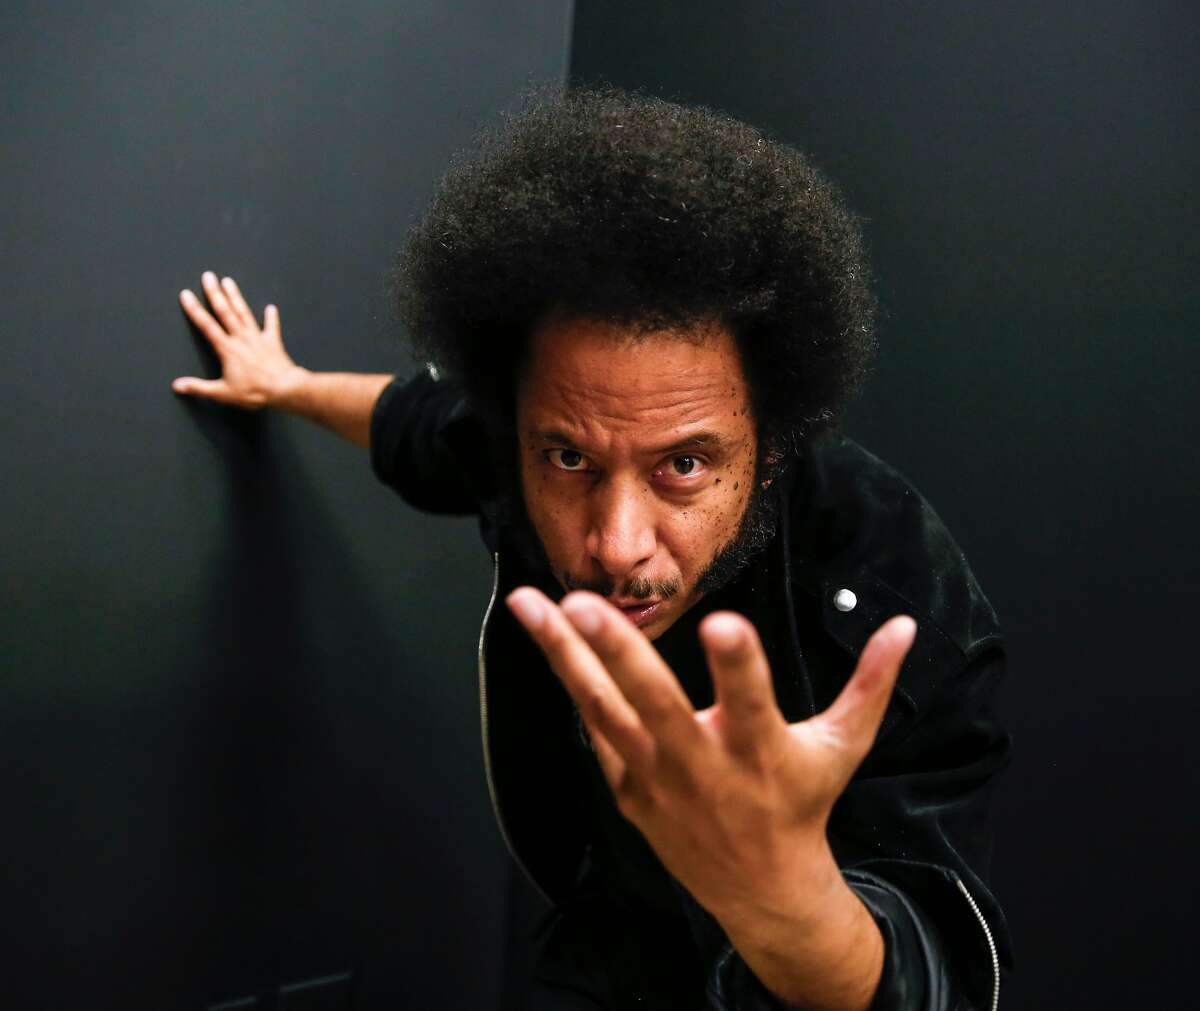 Boots Riley, director of the film, "Sorry to Bother You," is seen on Tuesday, June 26, 2018 in San Francisco, Calif.